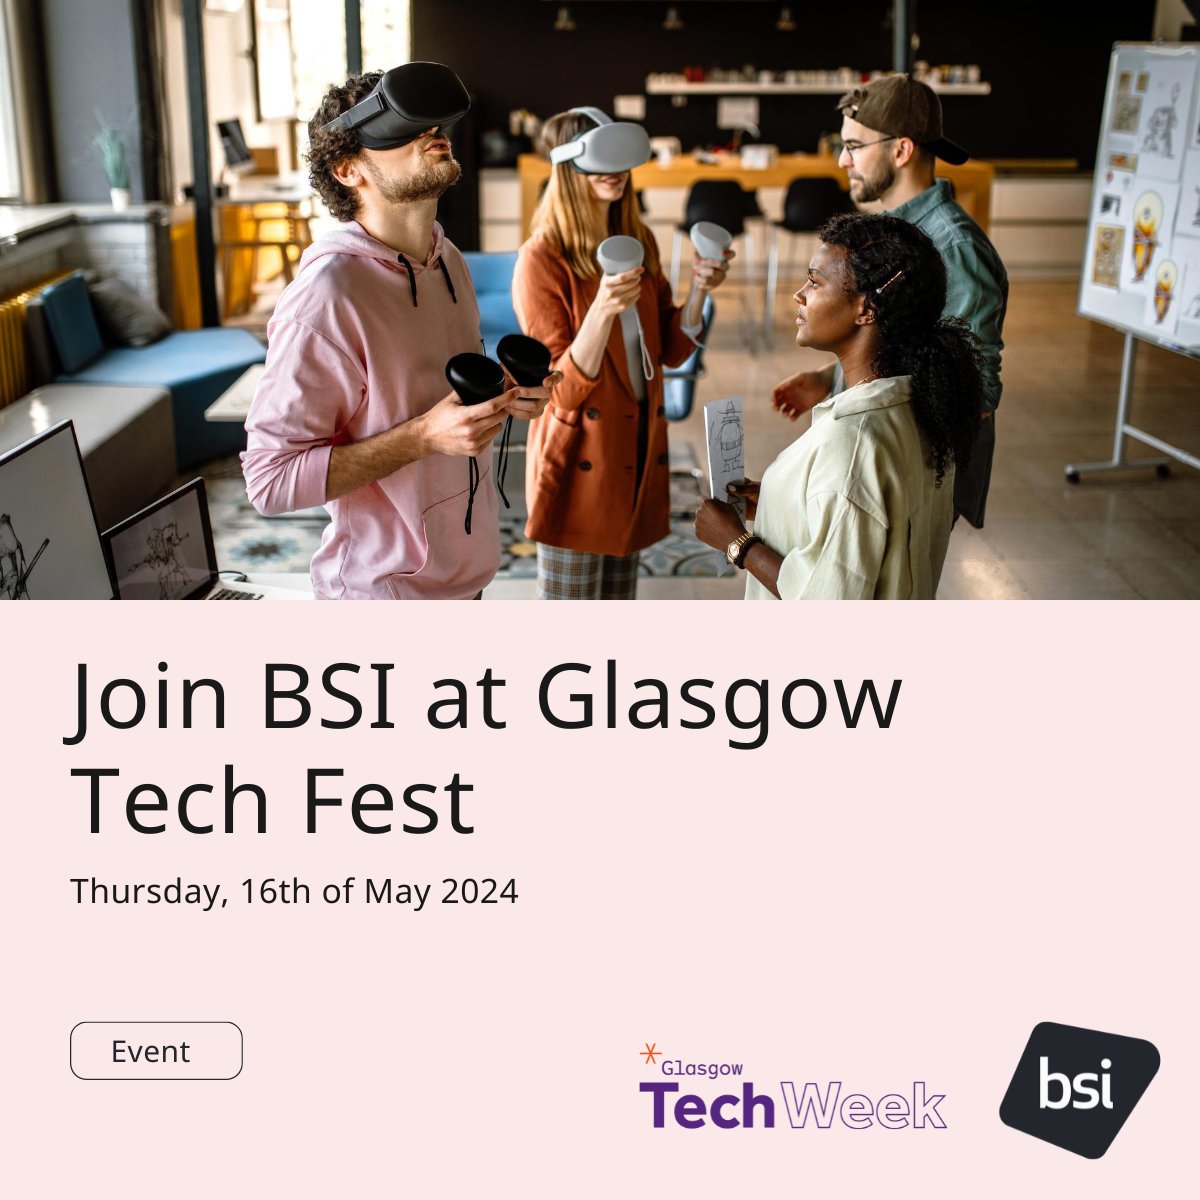 Join us at #GlasgowTechFest 2024 on Thurs 16 May! Swing by our booth and dive into chats about tech, standards, and innovation. Connect with experts and explore the future of tech with us: bit.ly/3UVcYSl #BSIStandards #GlasgowTechWeek #Innovation #ProudSponsors